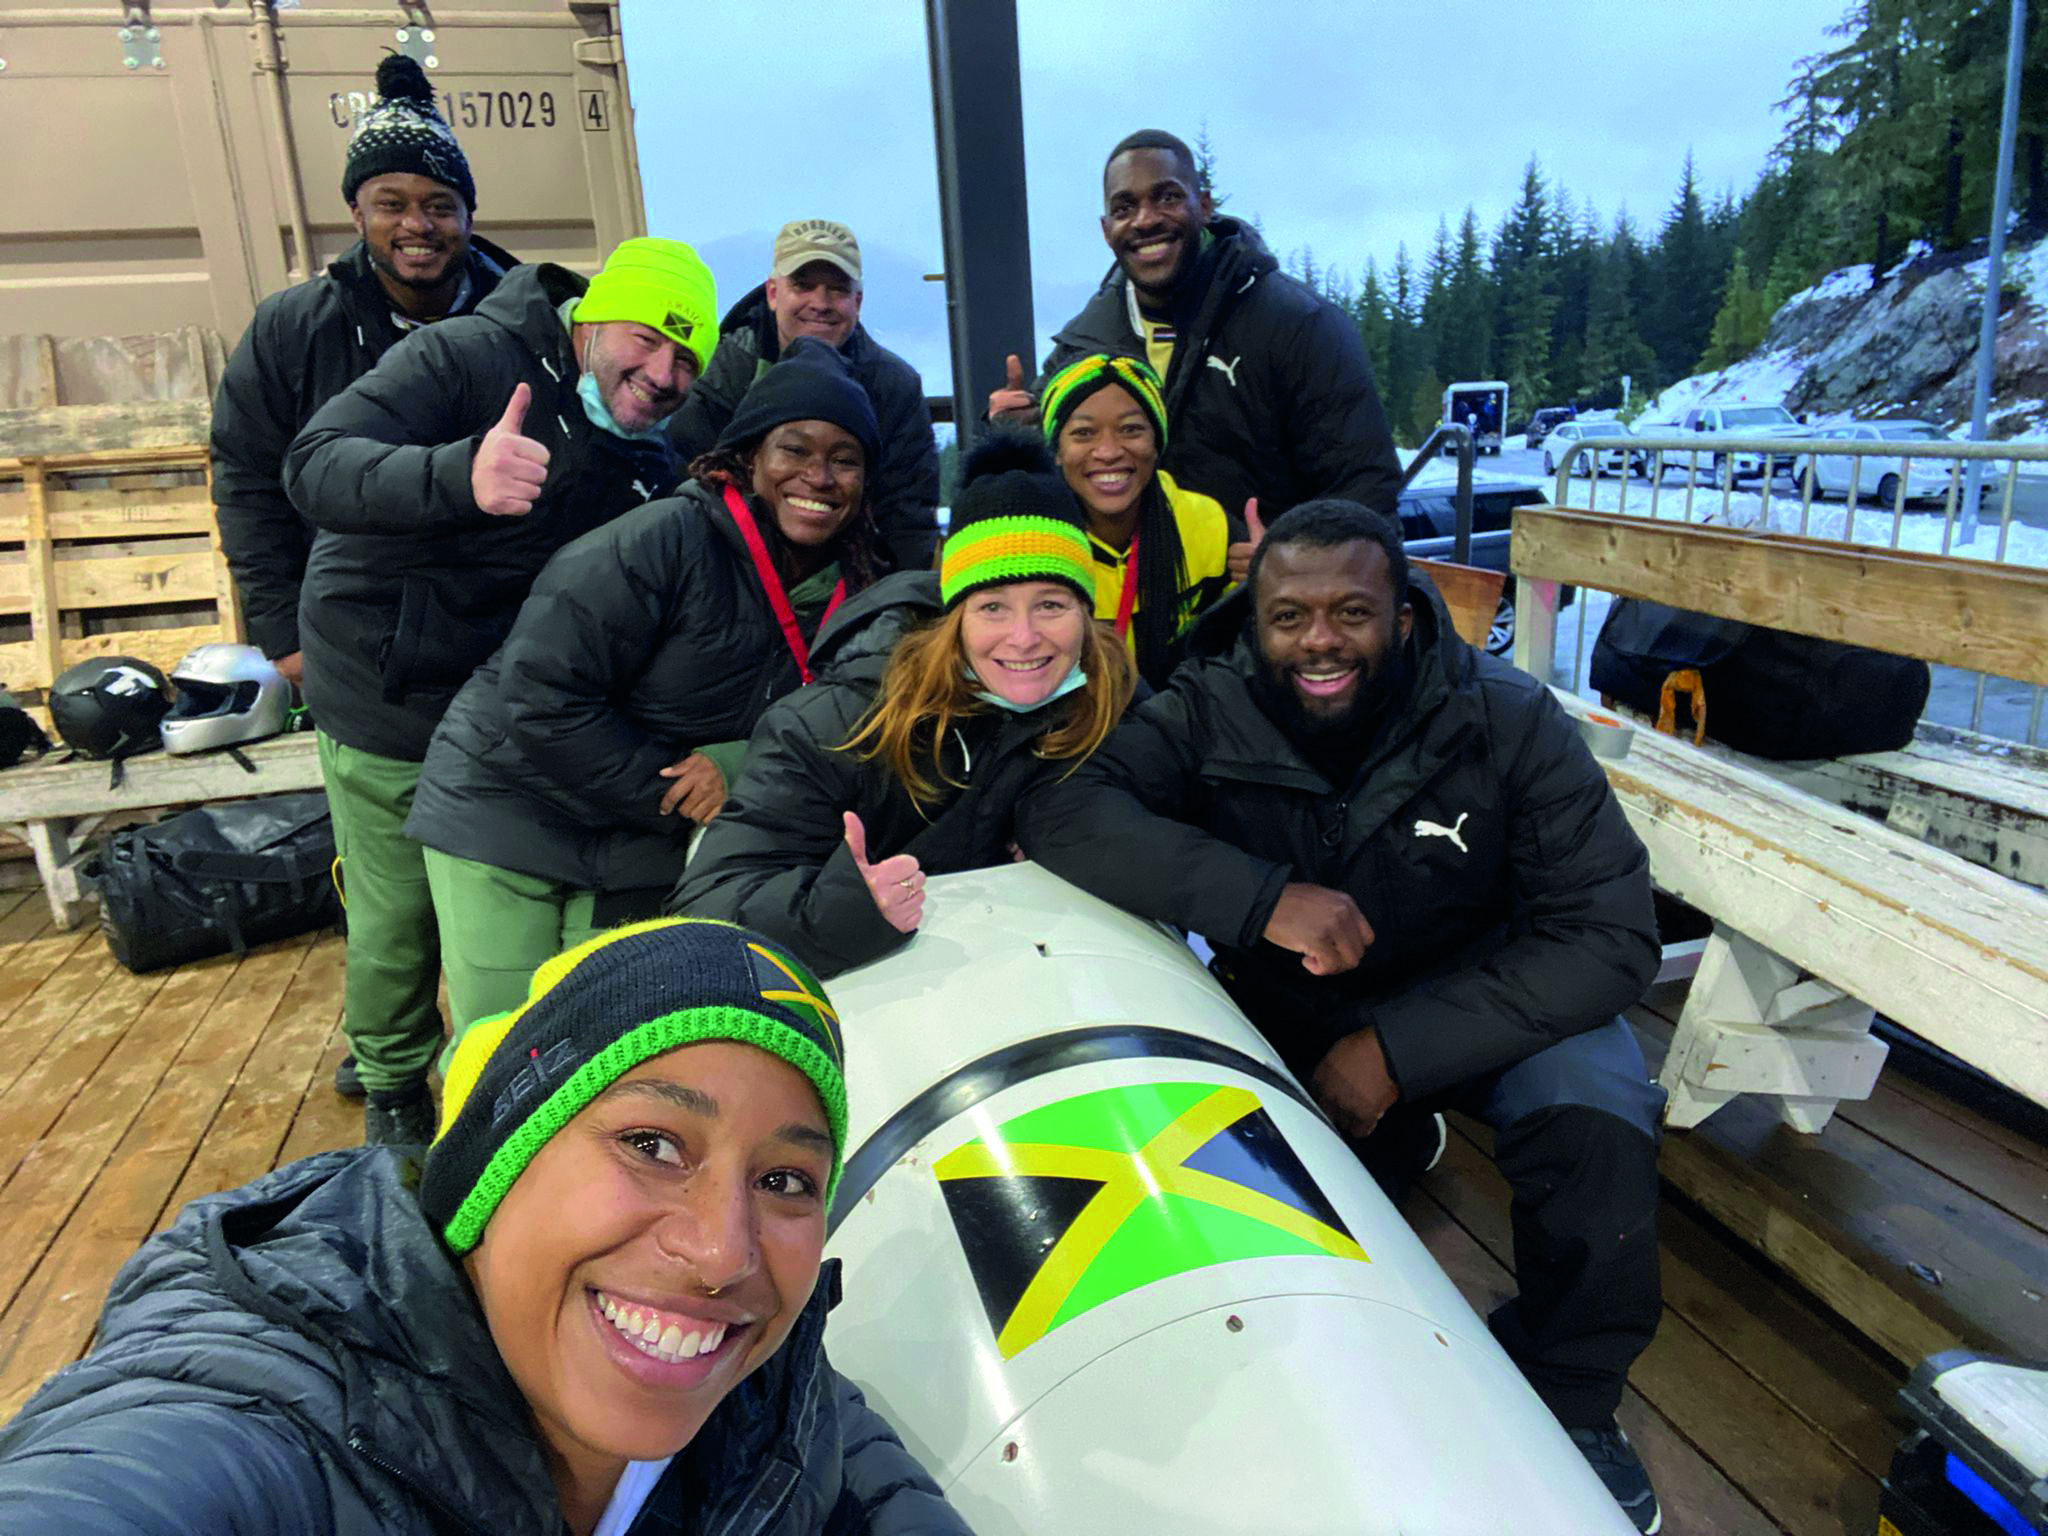 Shanwayne with colleagues and a Bobsleigh.